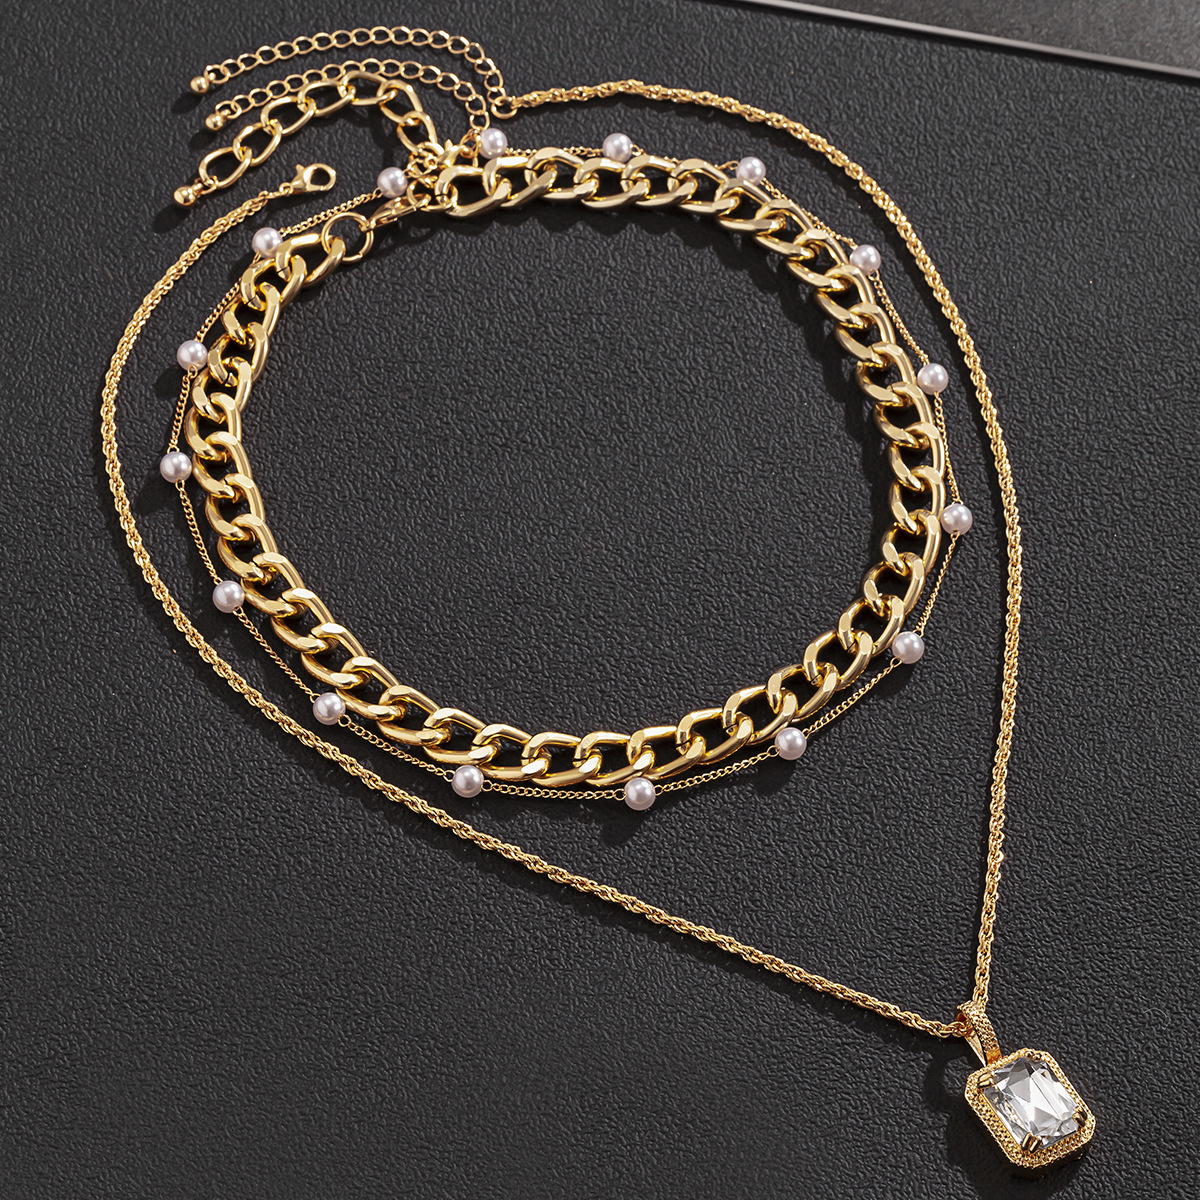 gold Cable Chain Necklace with Pearls